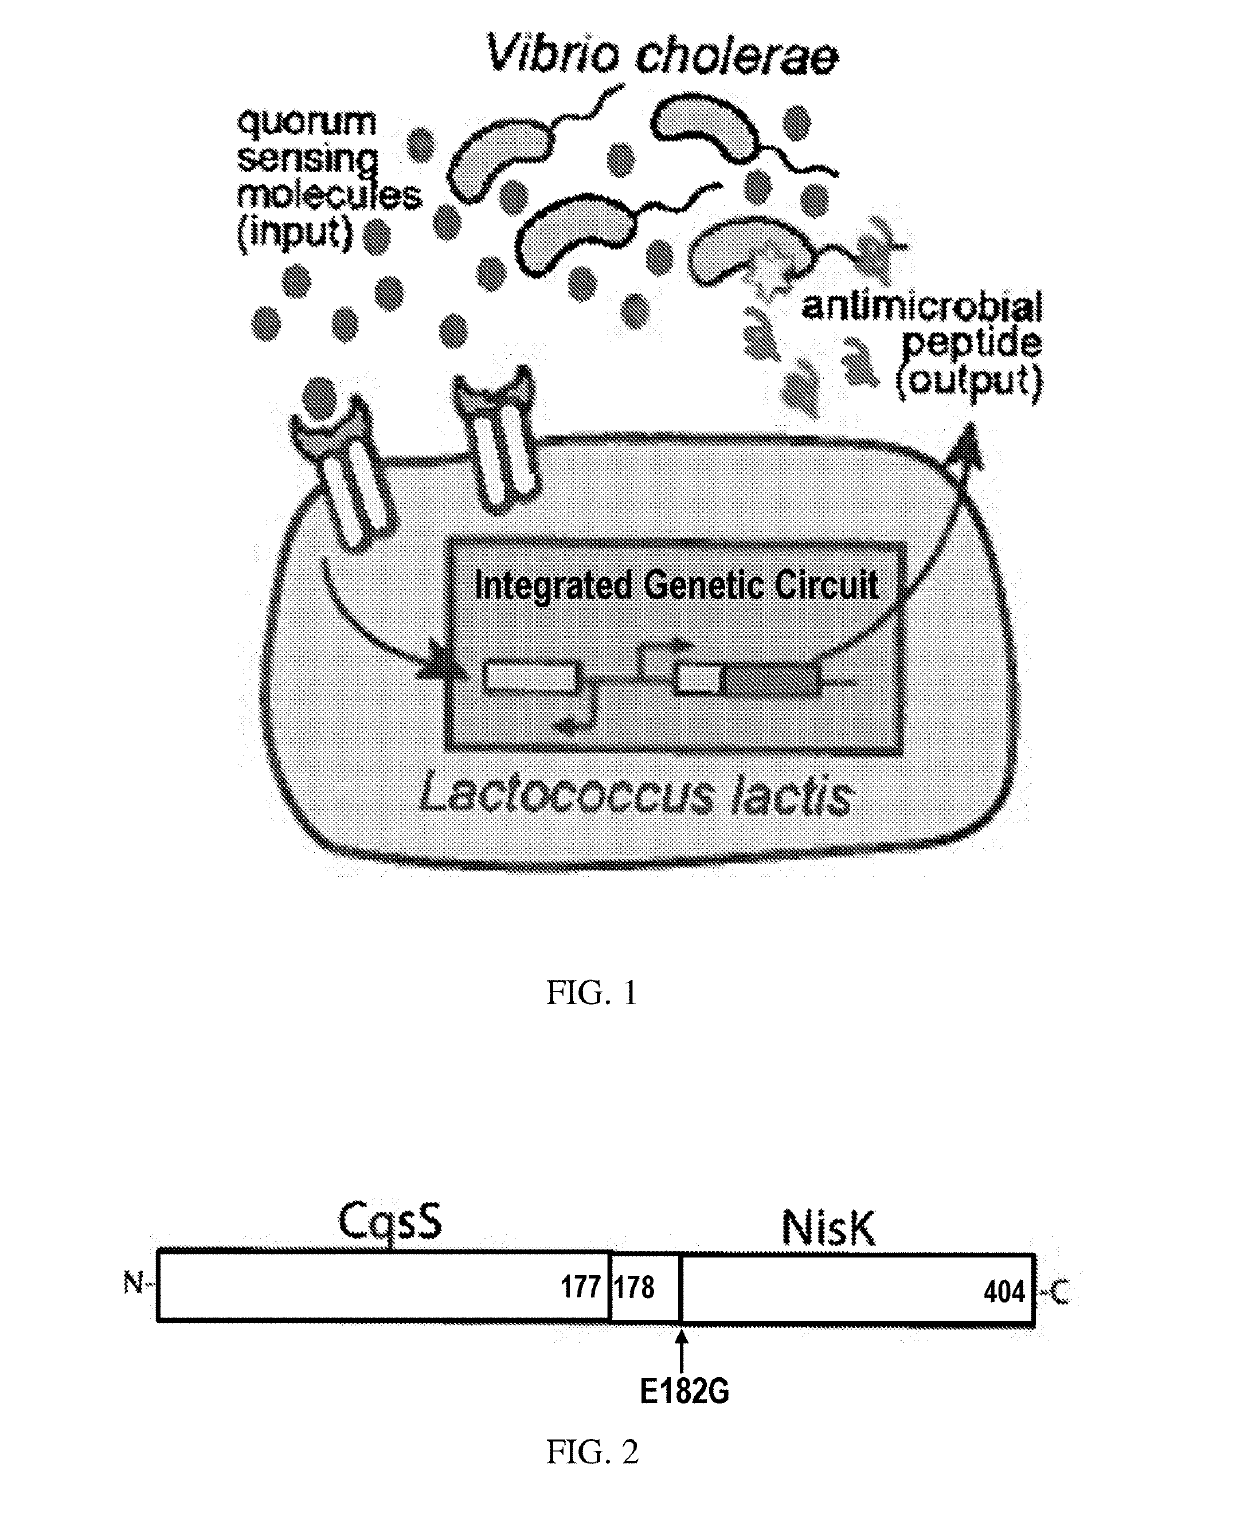 Synthetic hybrid receptor and genetic circuit in bacteria to detect enteric pathogenic microorganisms